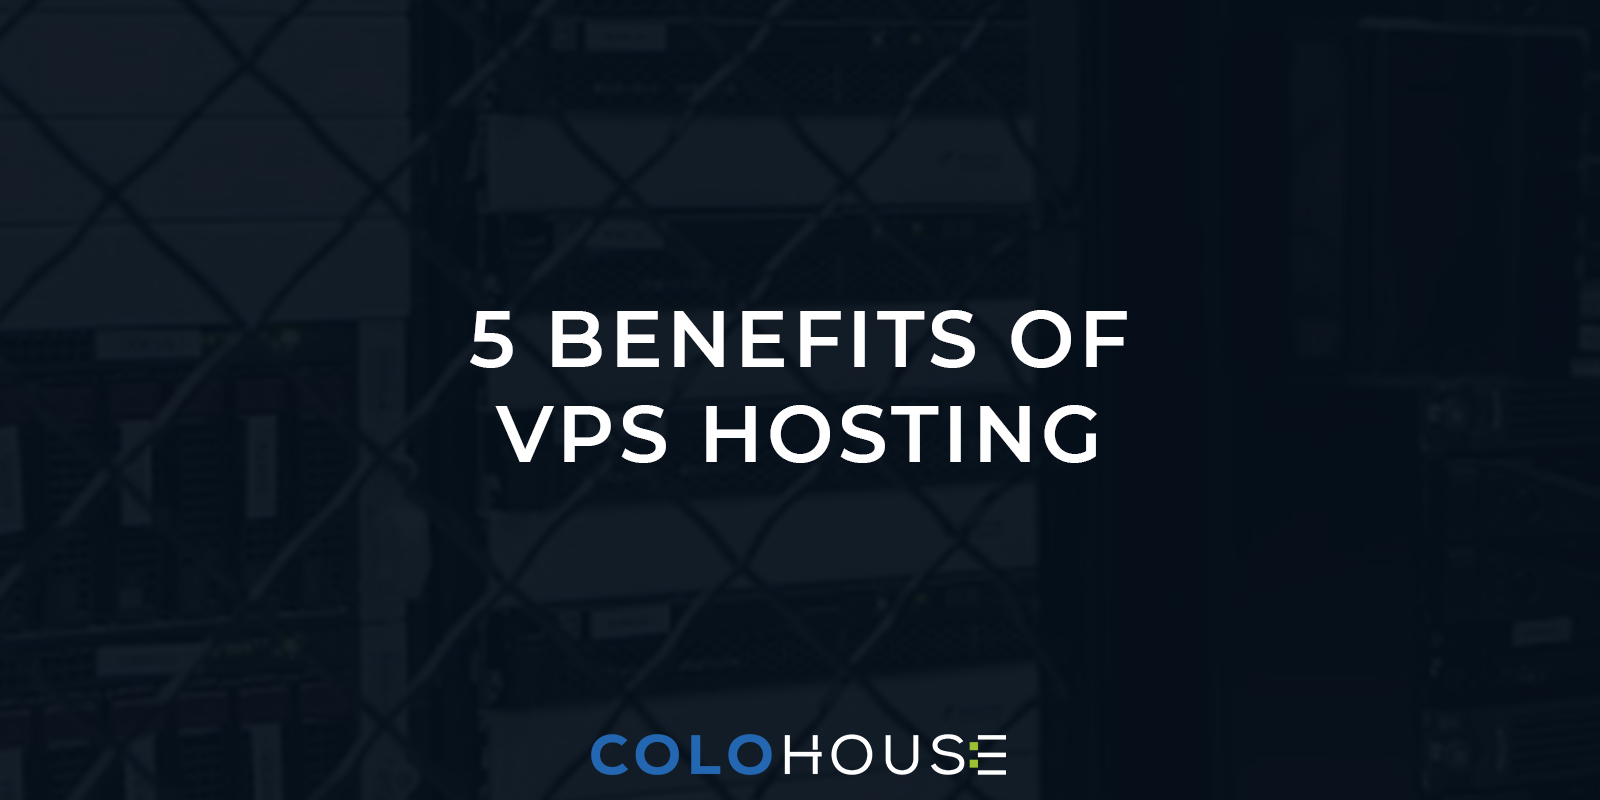 What are the Benefits of VPS hosting